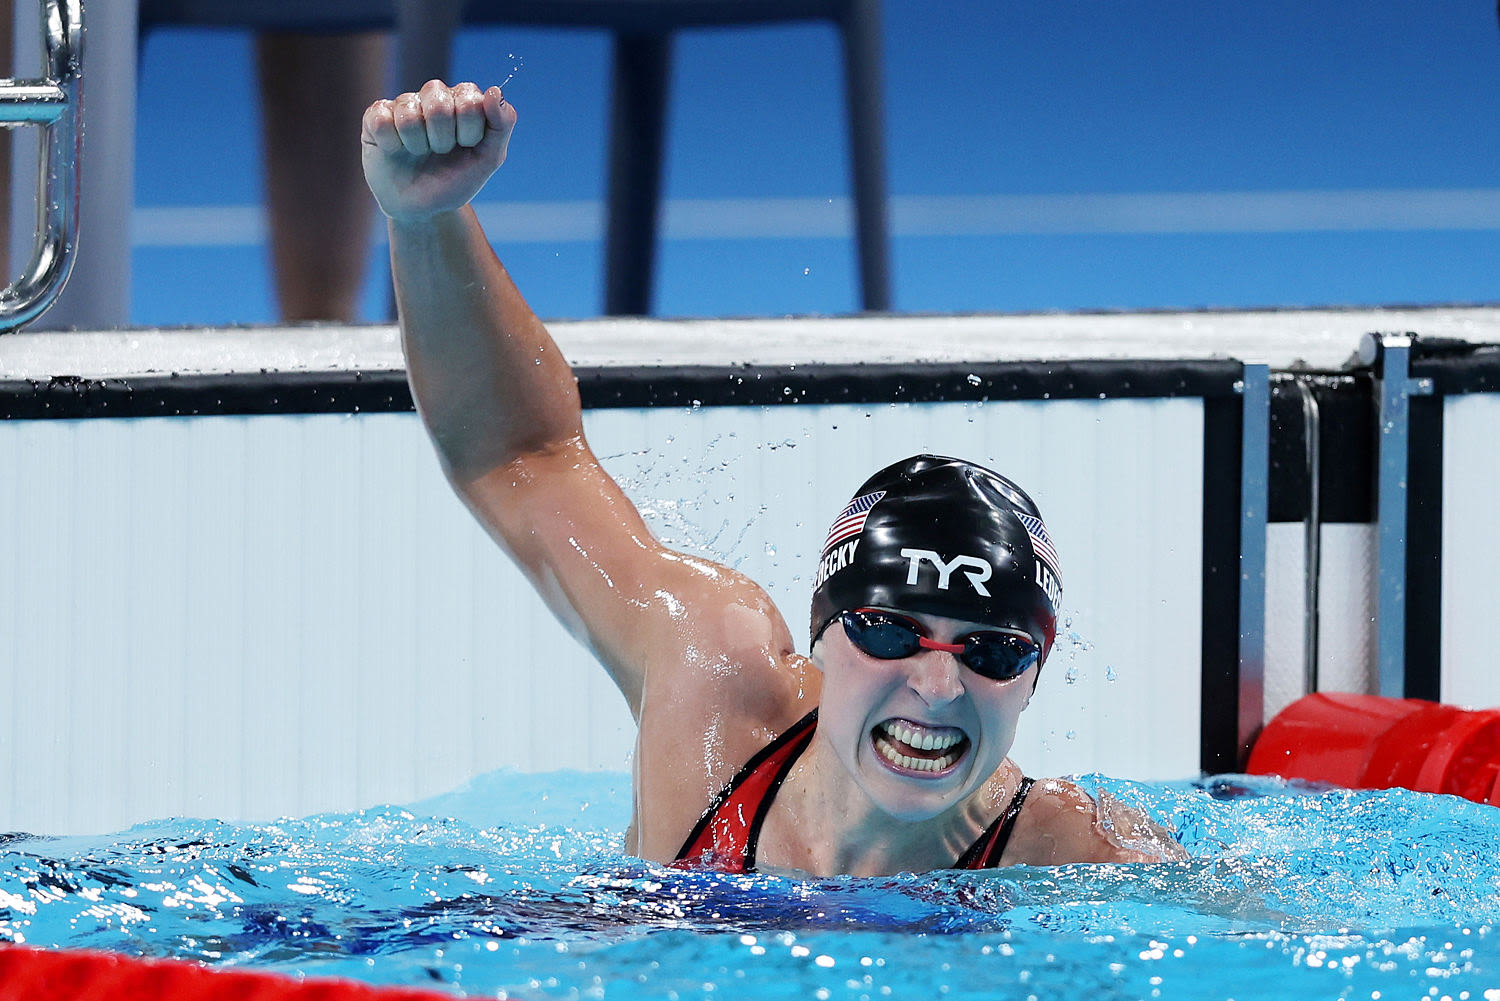 Katie Ledecky becomes most decorated American female Olympian after earning 13th medal in Paris